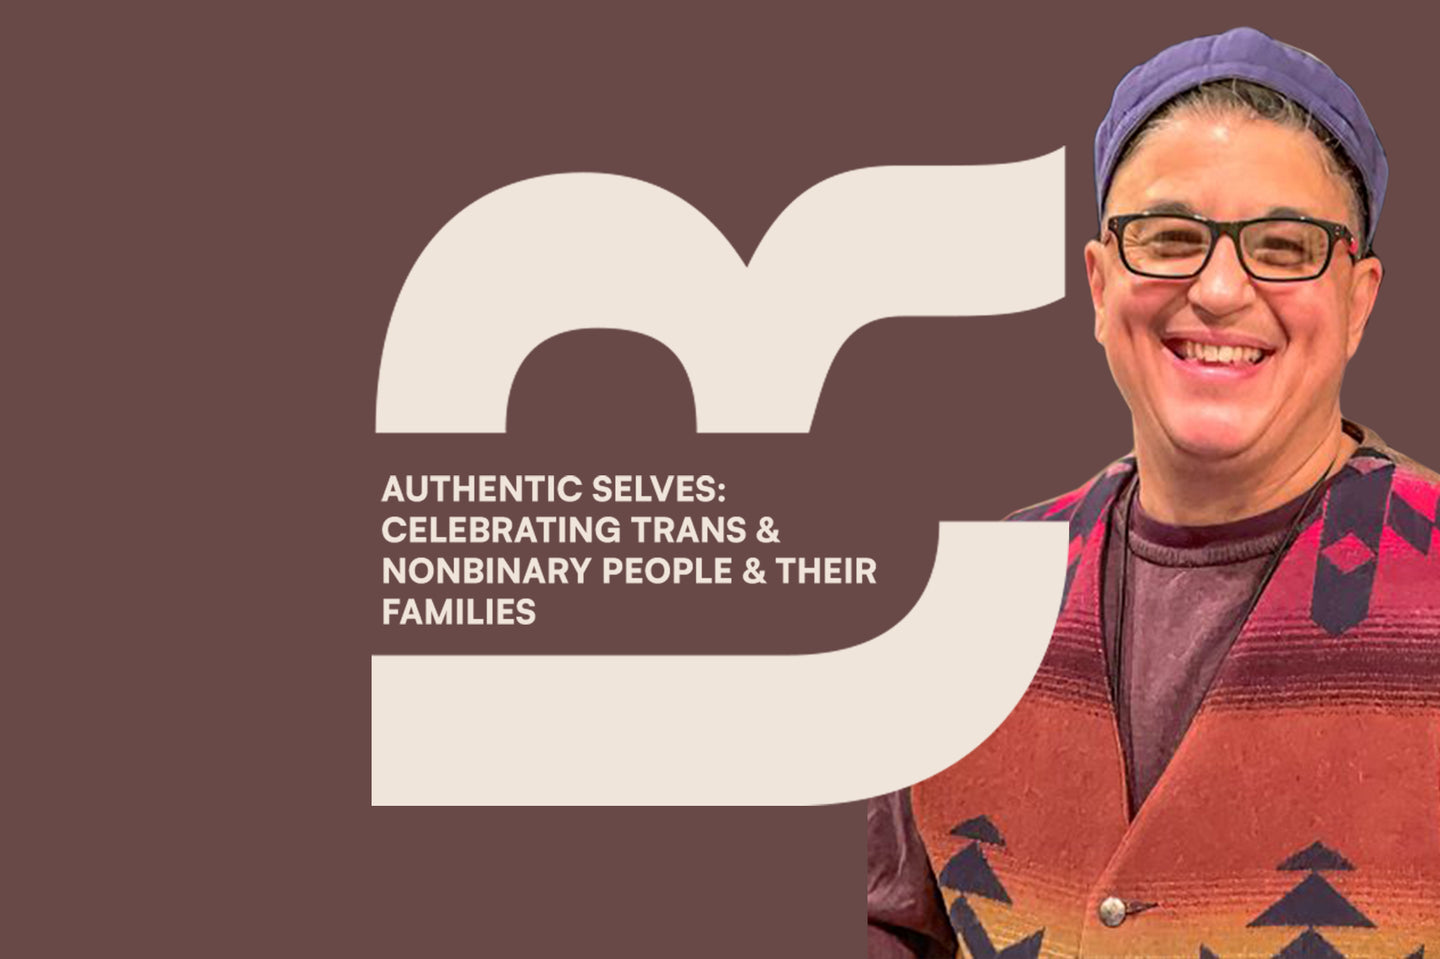 Authentic Selves: Celebrating Trans & Nonbinary People & Their Families